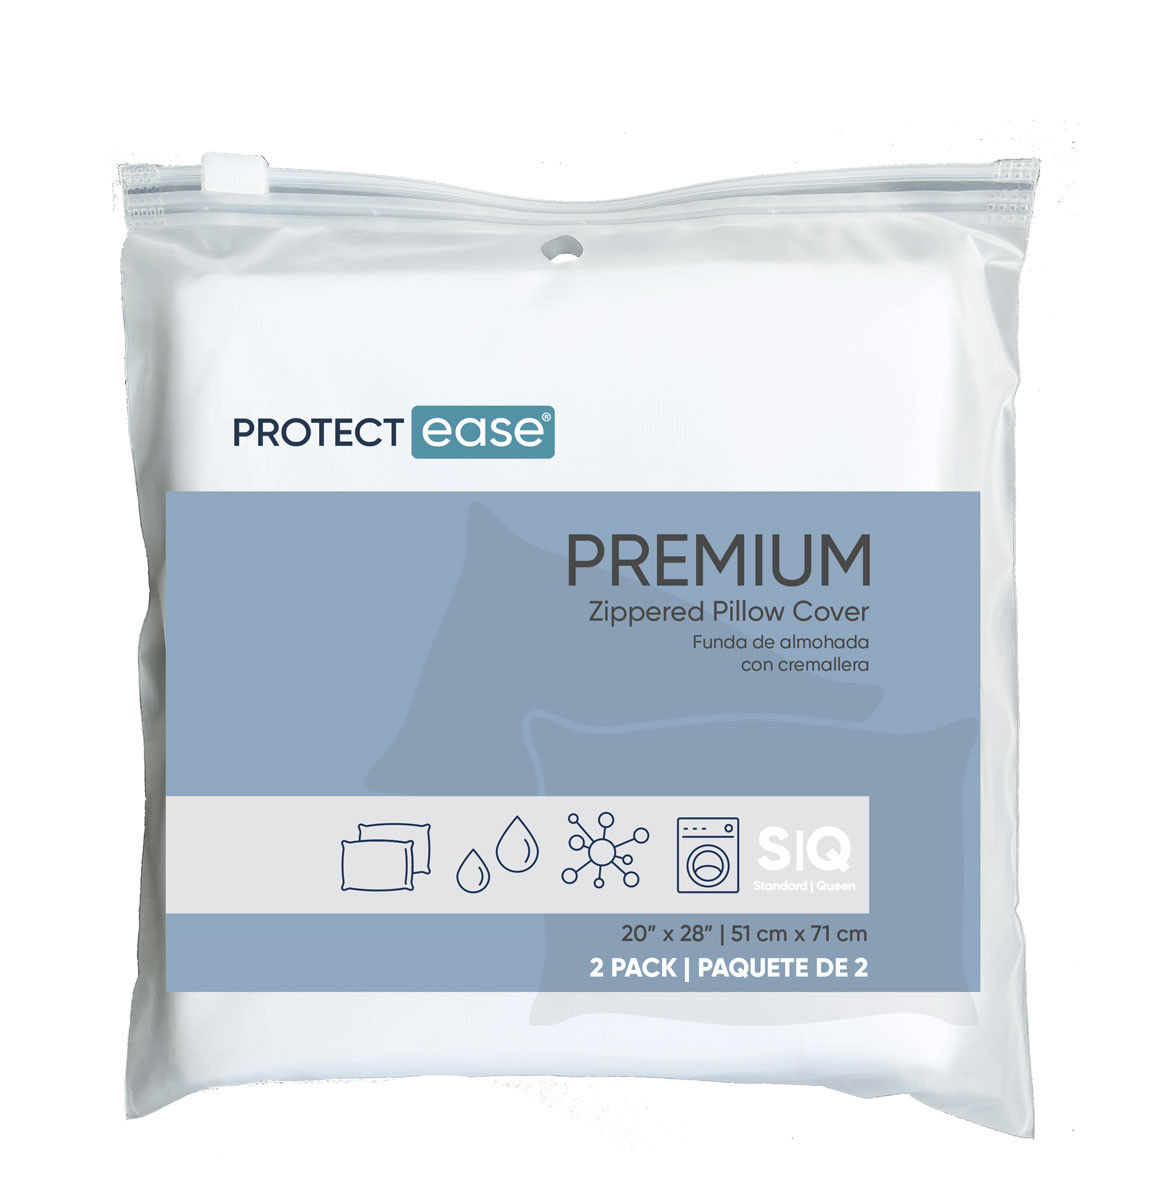 Does the PREMIUM LINE pillow ease cover protect against bedbugs?